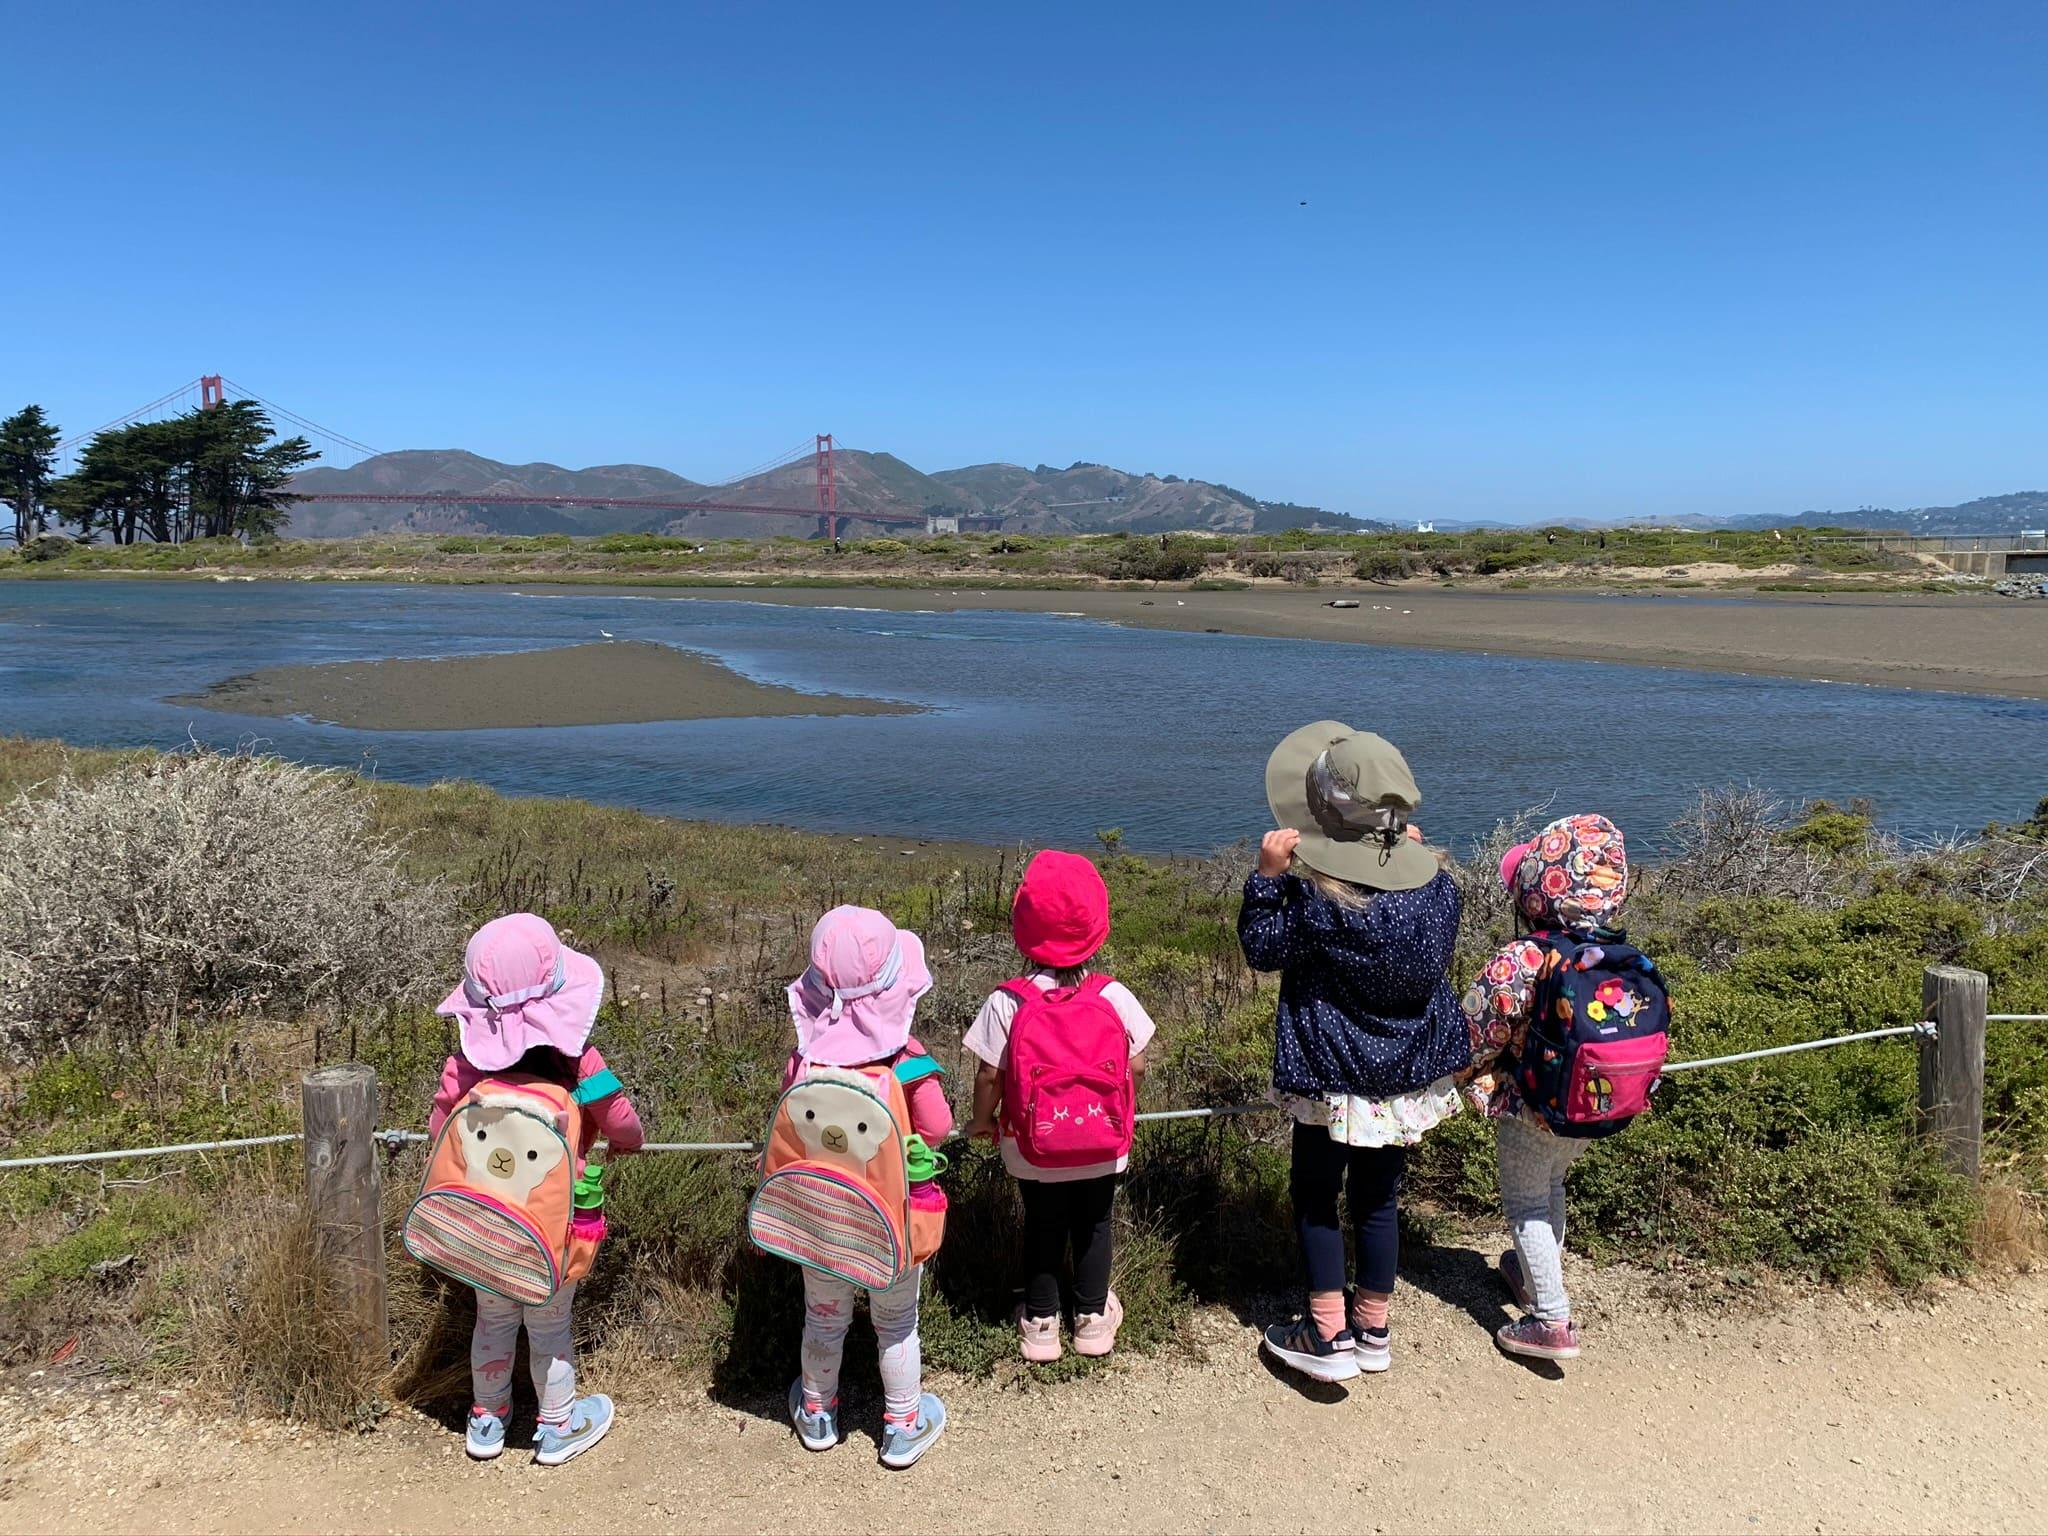 Children looking at Crissy Marsh at the Presidio, with the Golden Gate Bridge in the background. Photo by Little Bee Preschool.